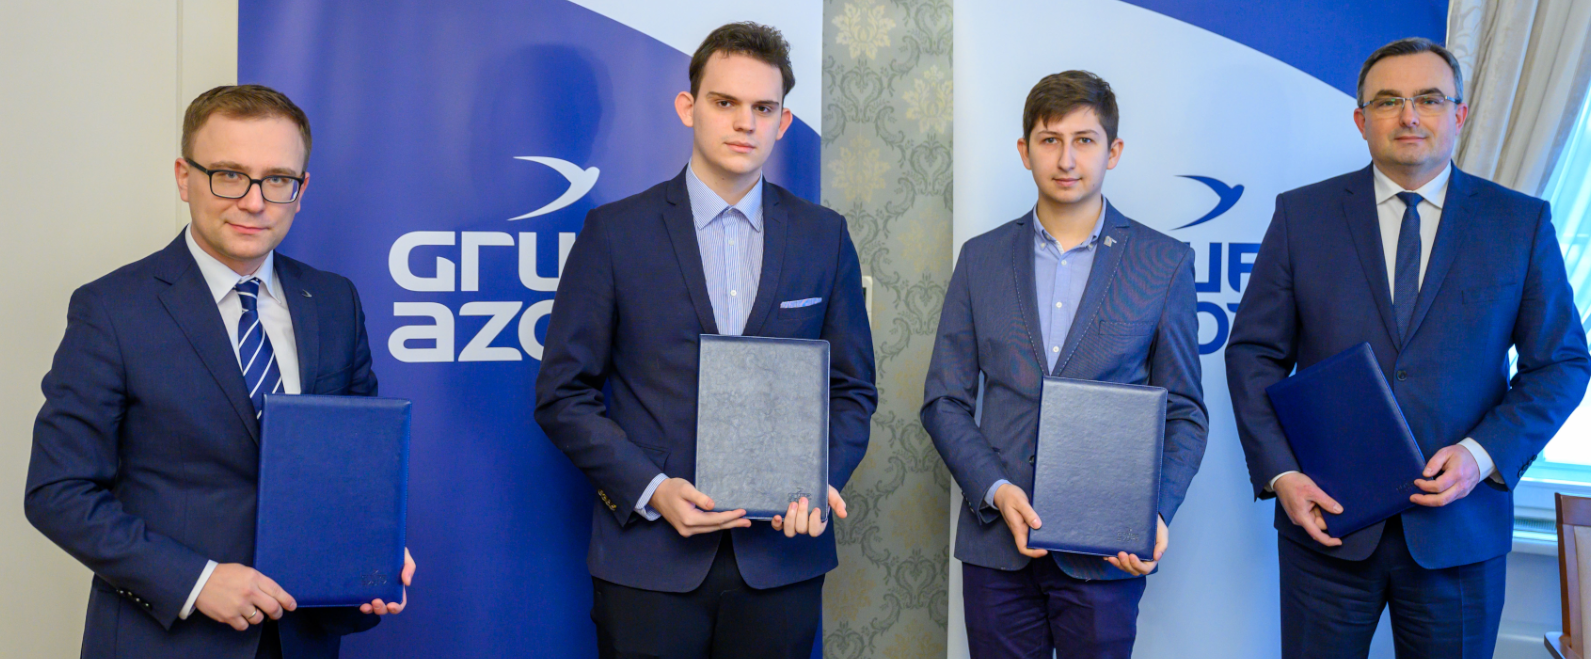 New participants selected for Grupa Azoty’s 5th Ambassador Programme